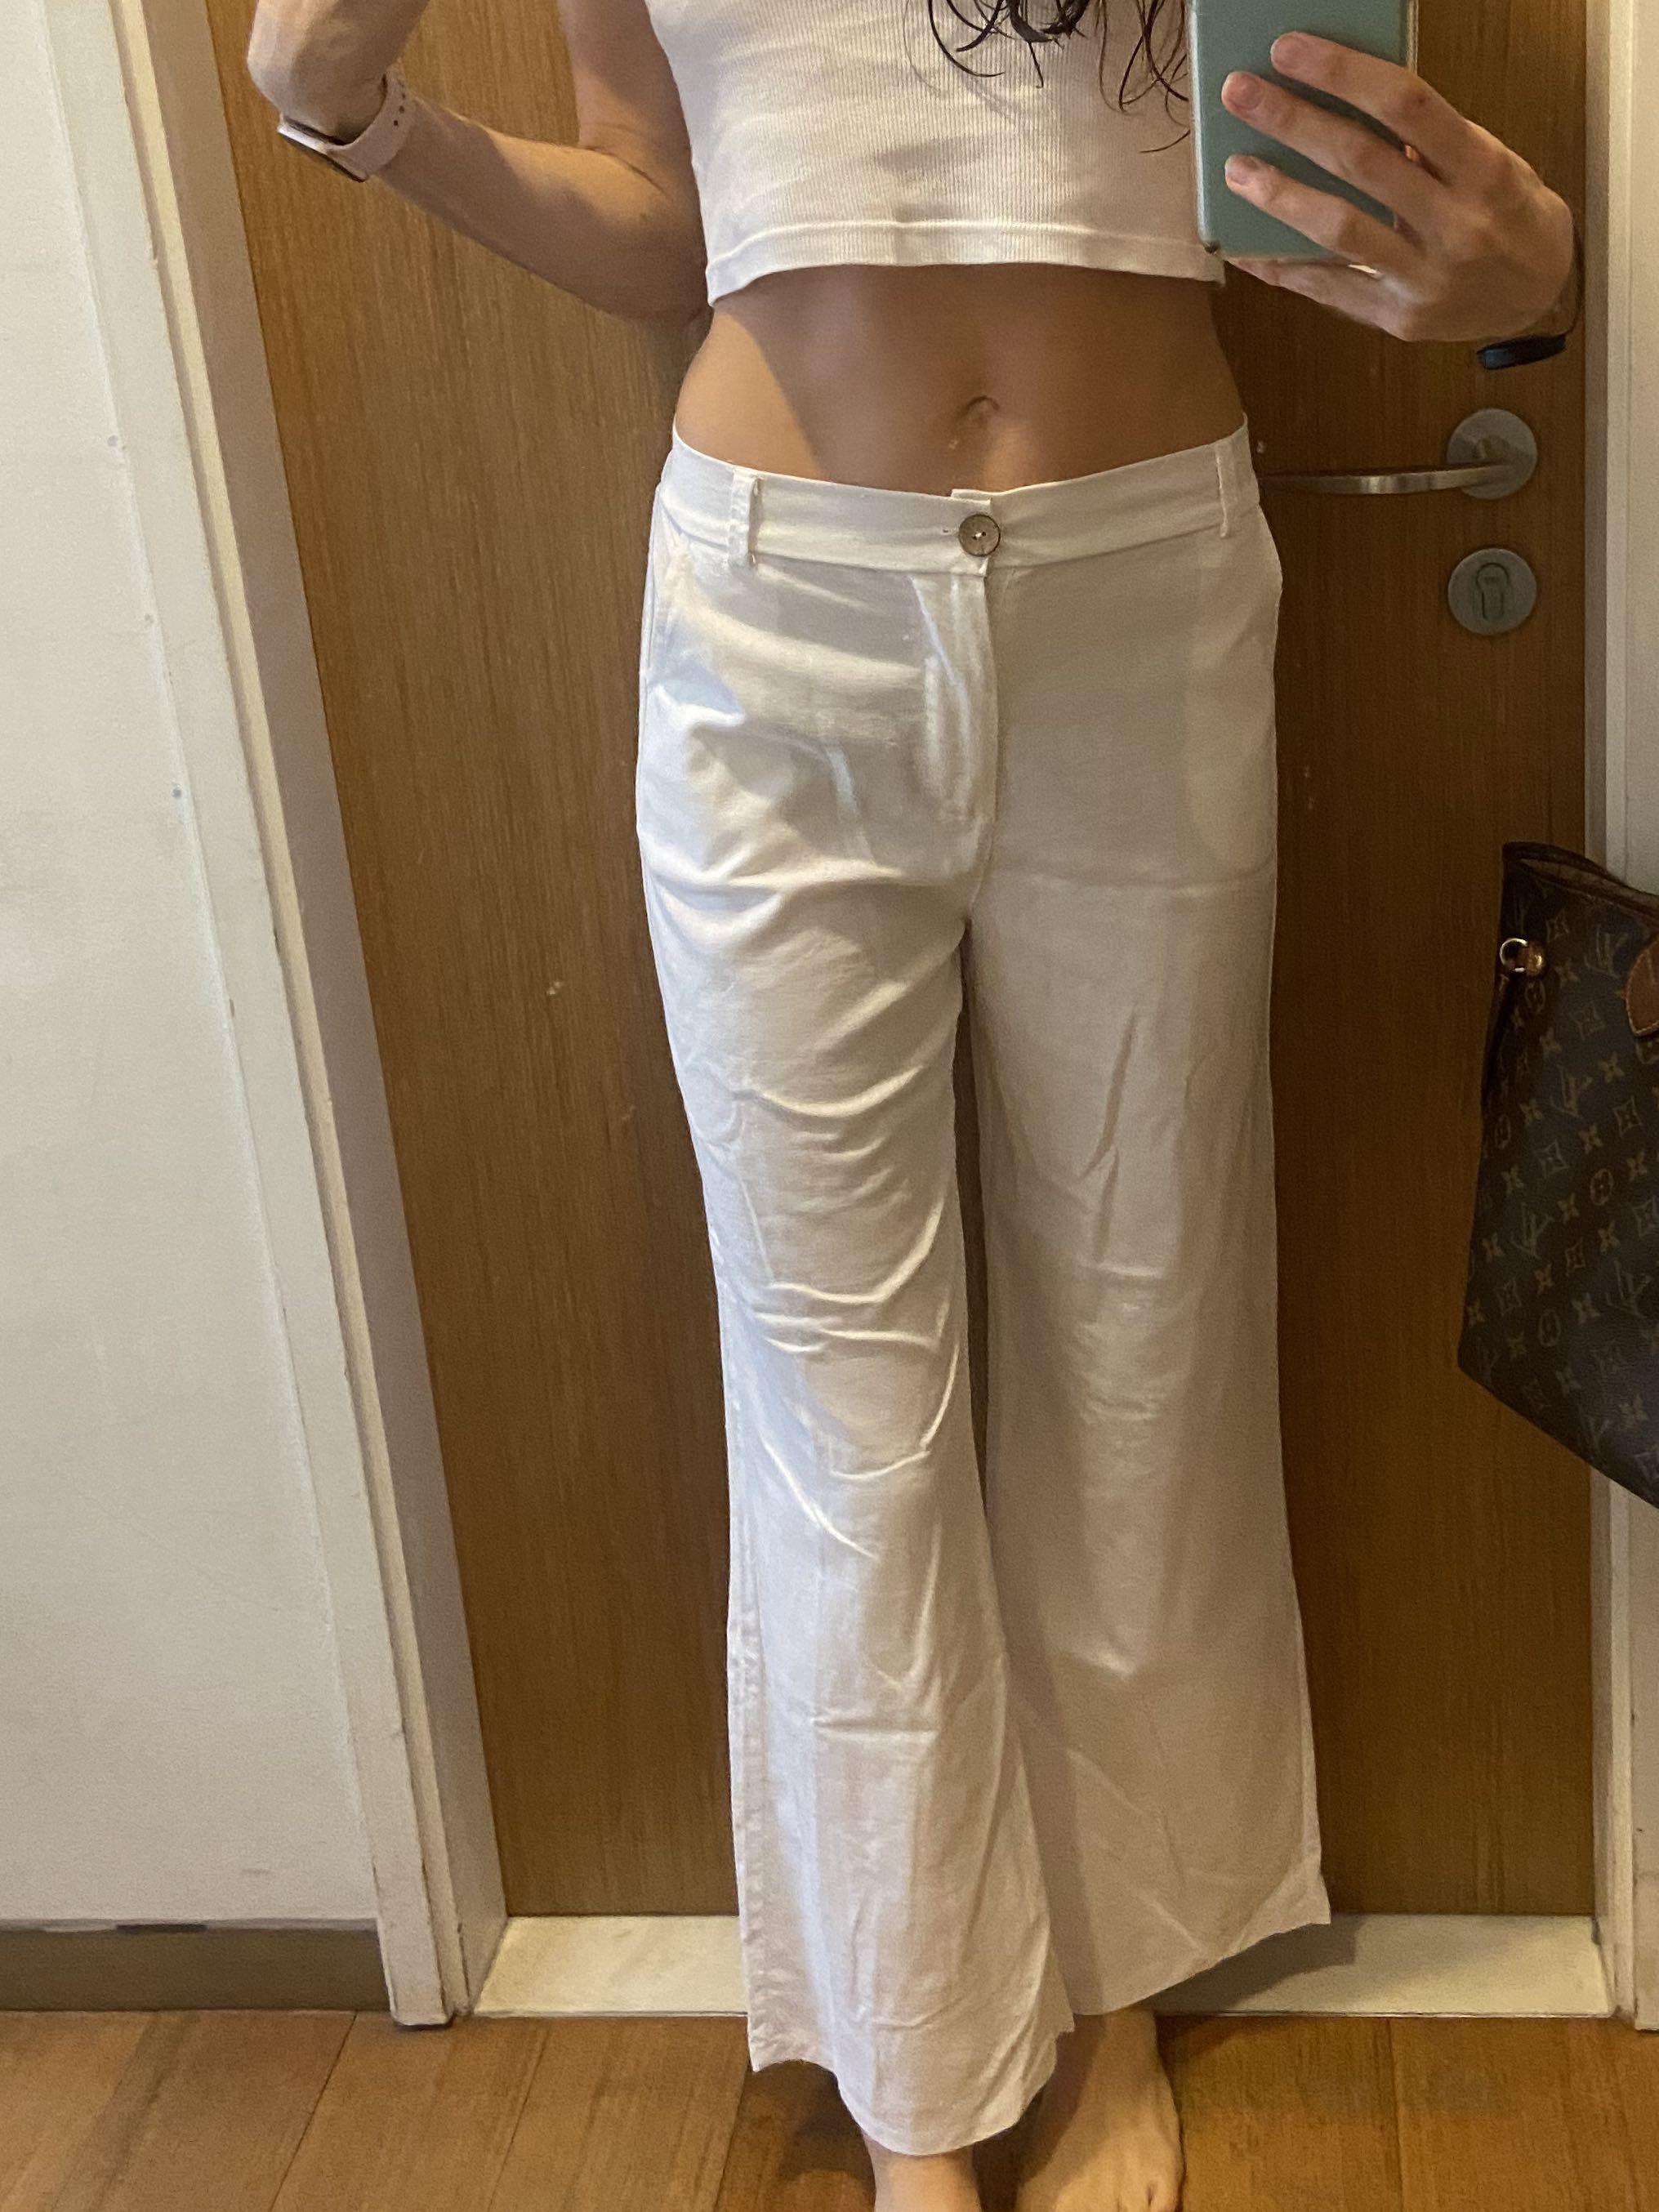 White Linen Look Low Rise Tailored Trousers  PrettyLittleThing